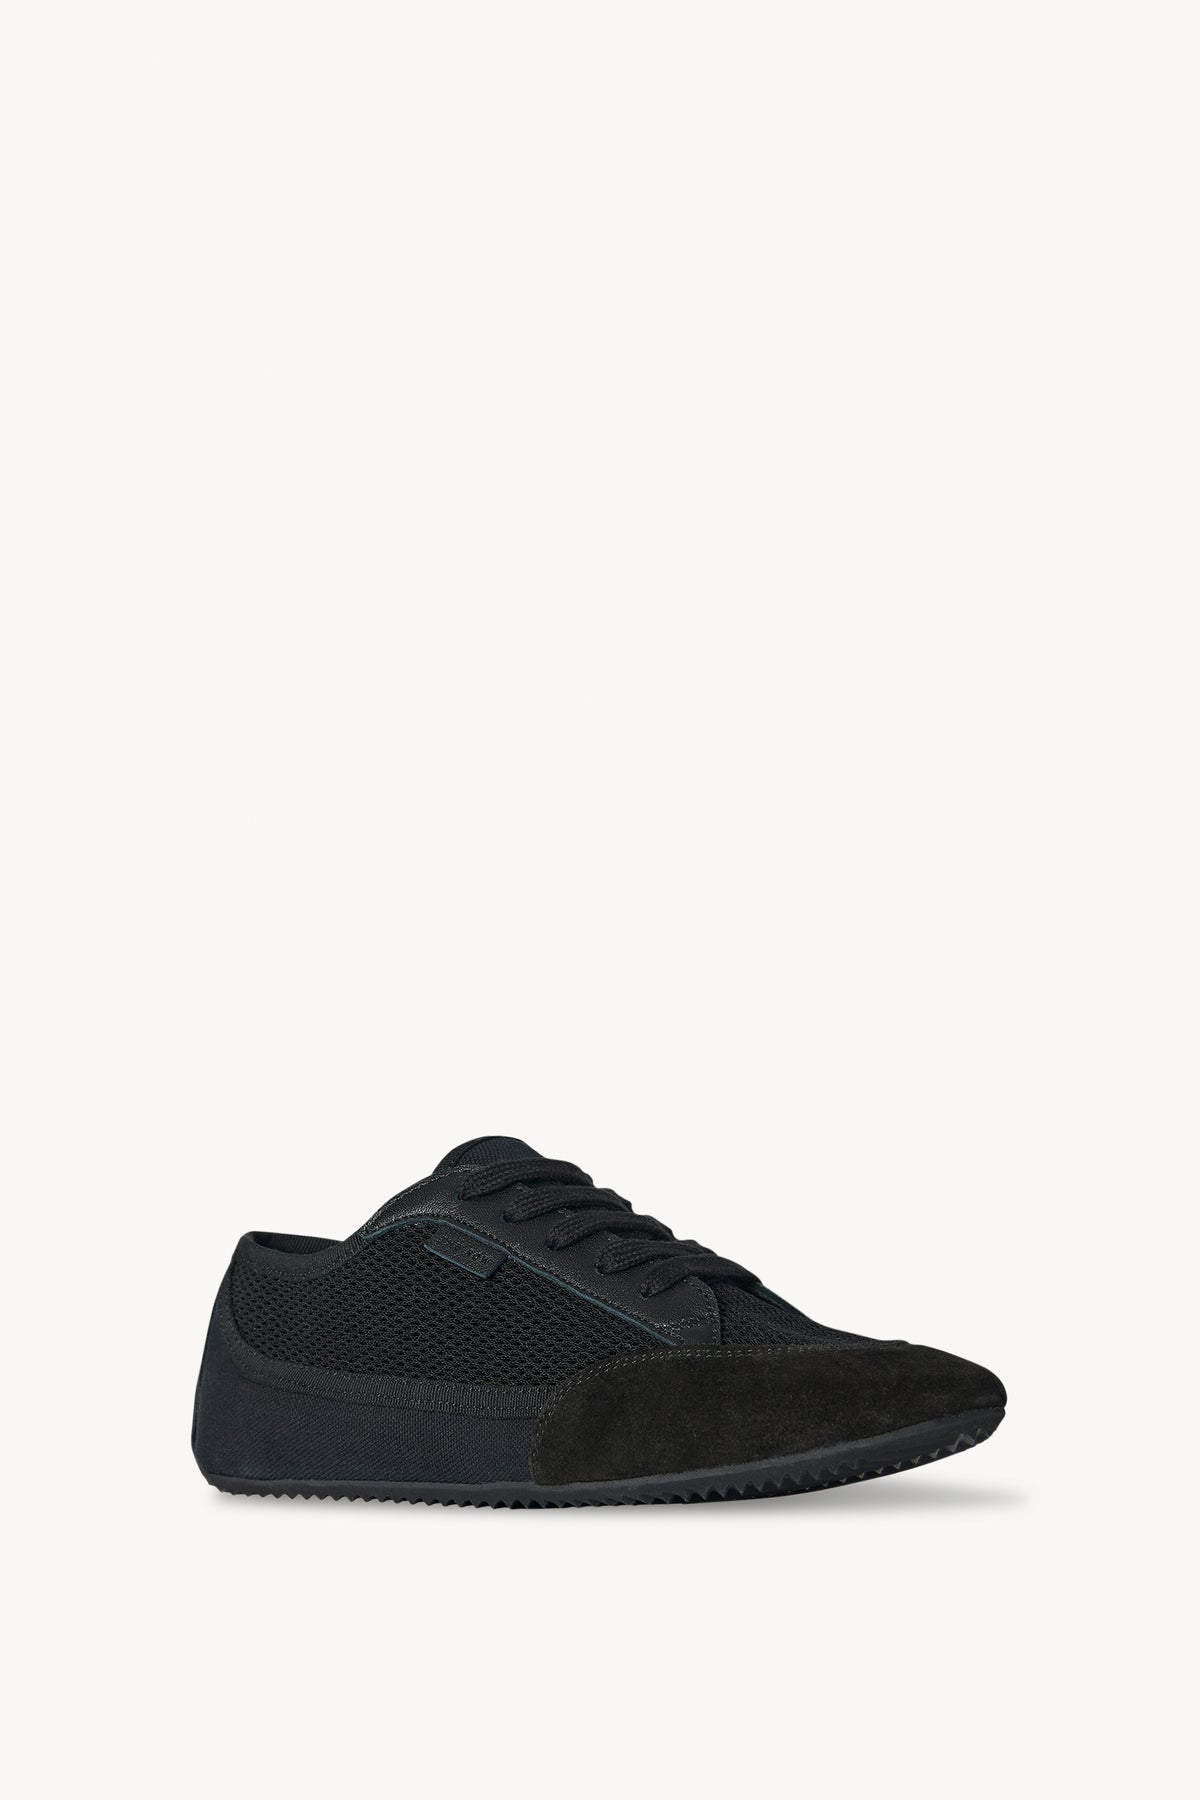 Bonnie Sneaker Black/black in Canvas and Suede – The Row